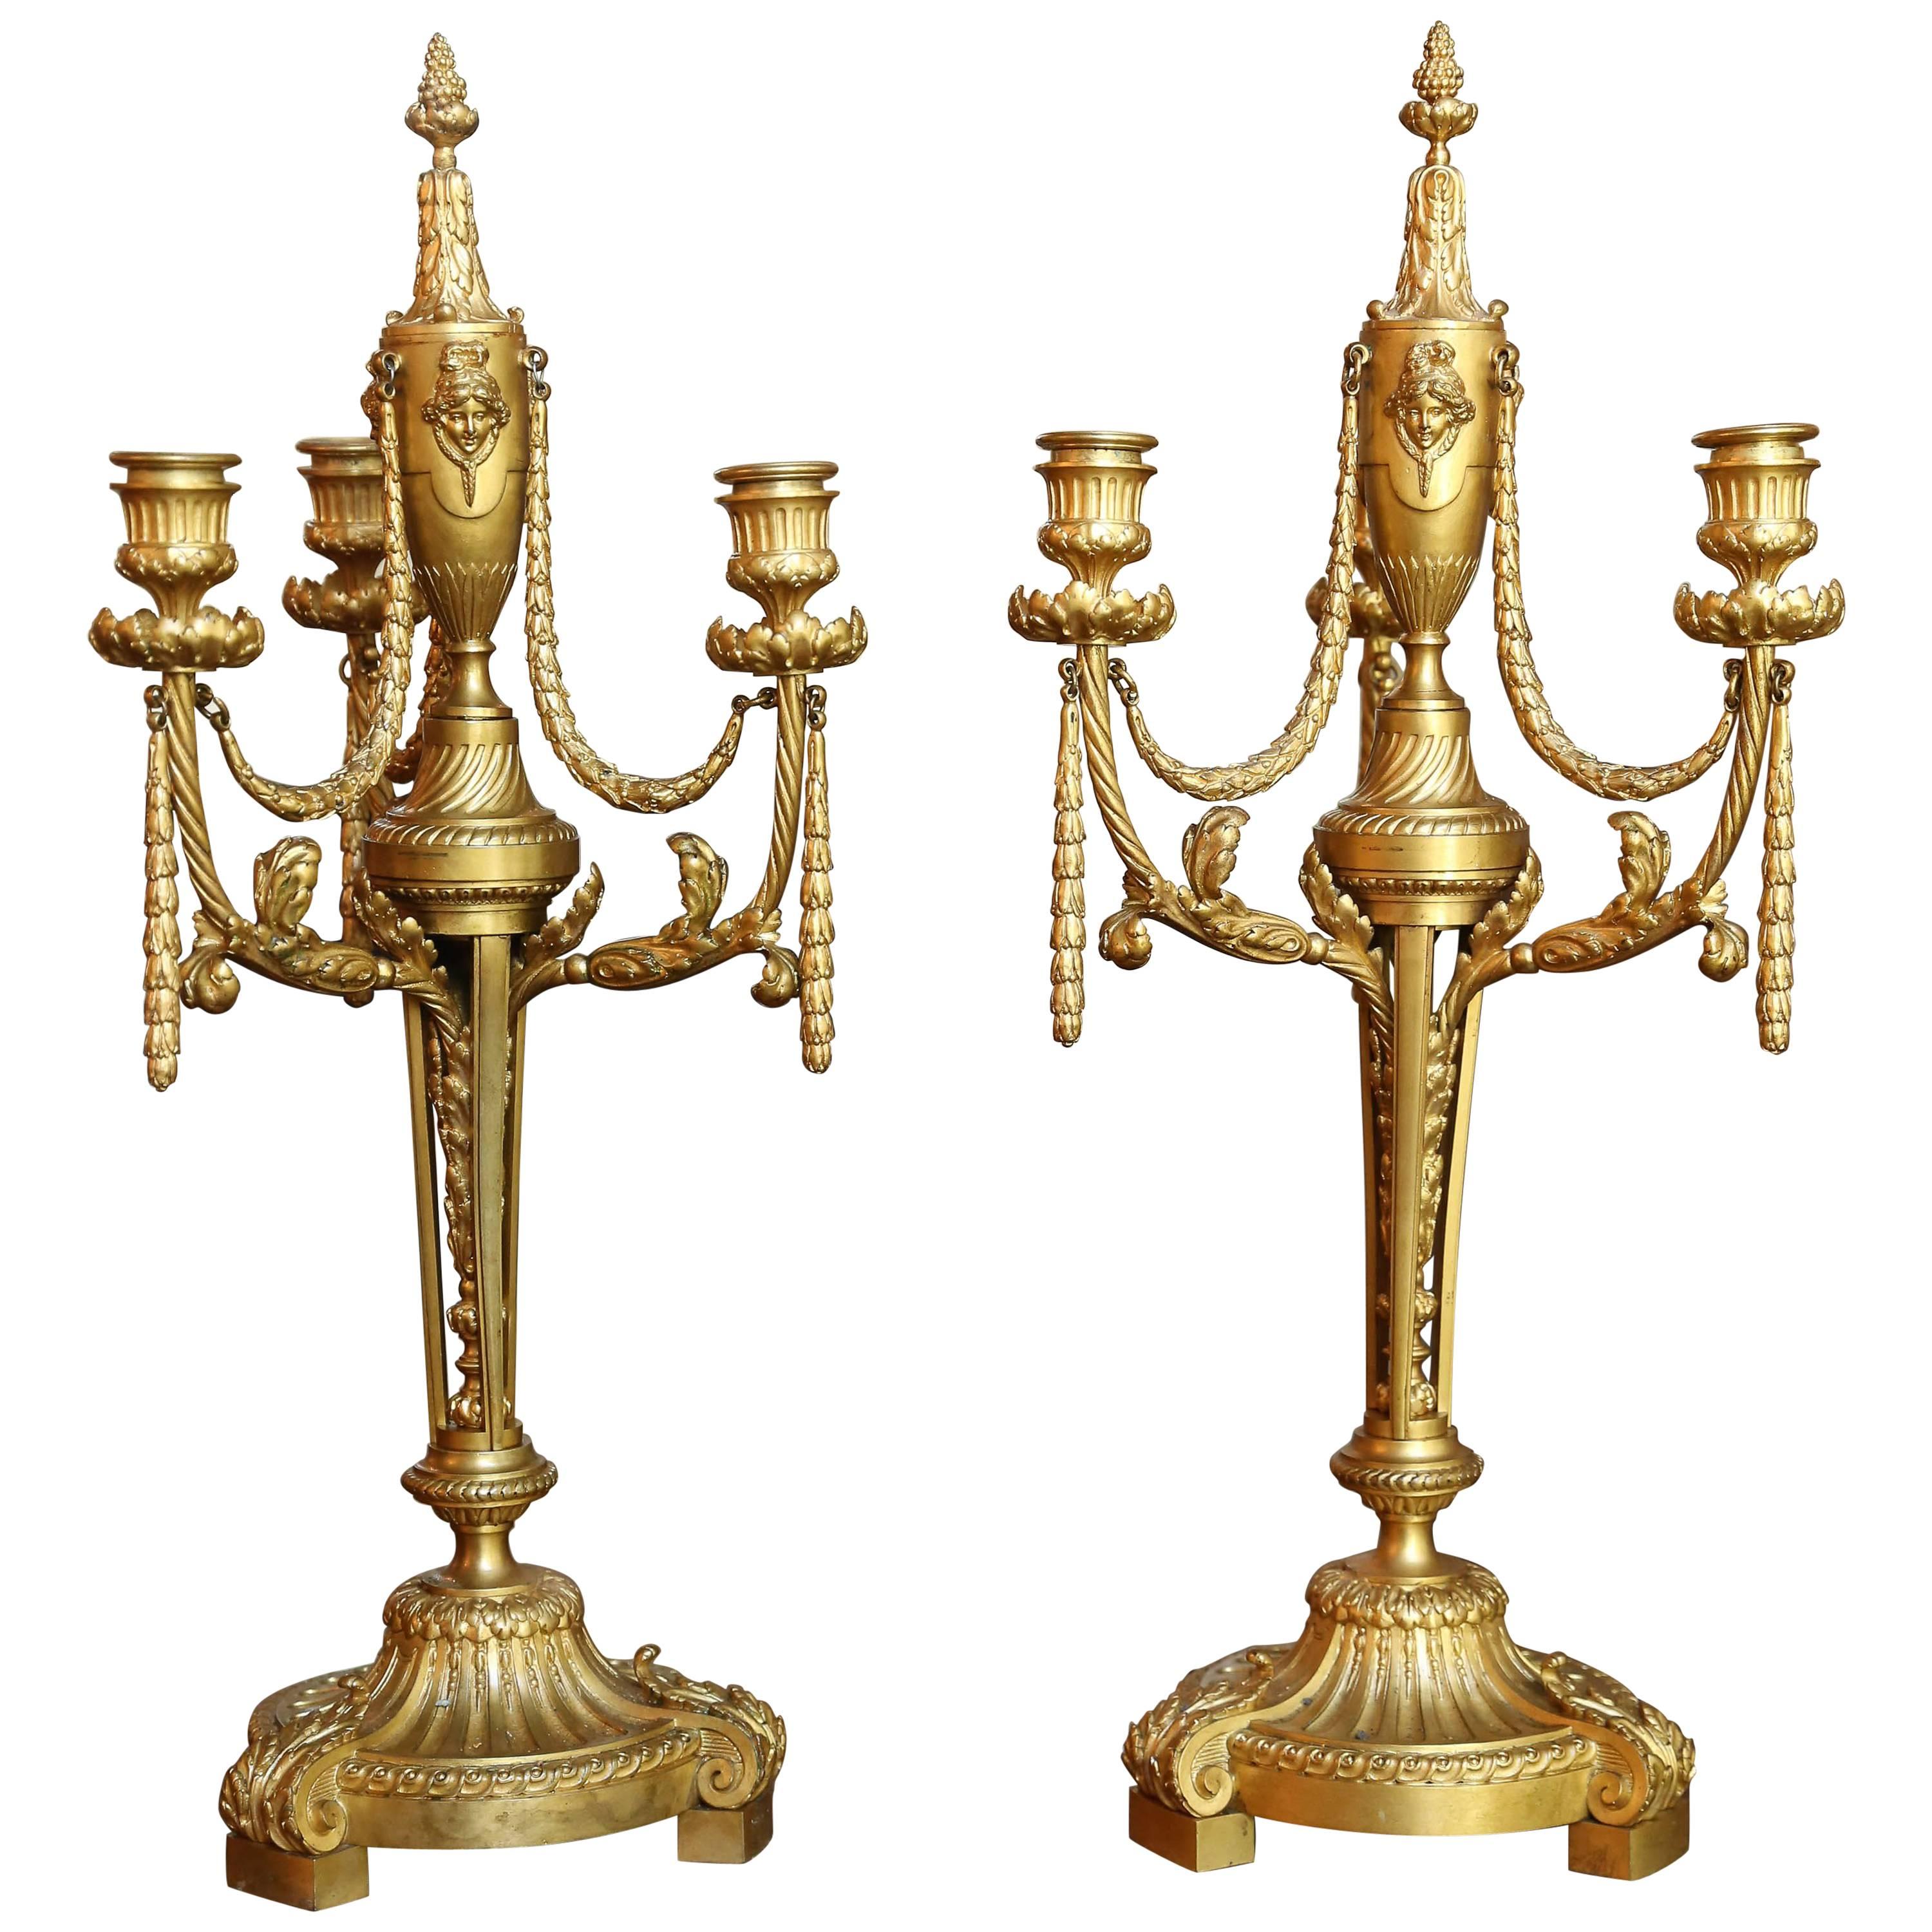 French Bronze Doré Candelabrum, 19Th Century with Three Arms